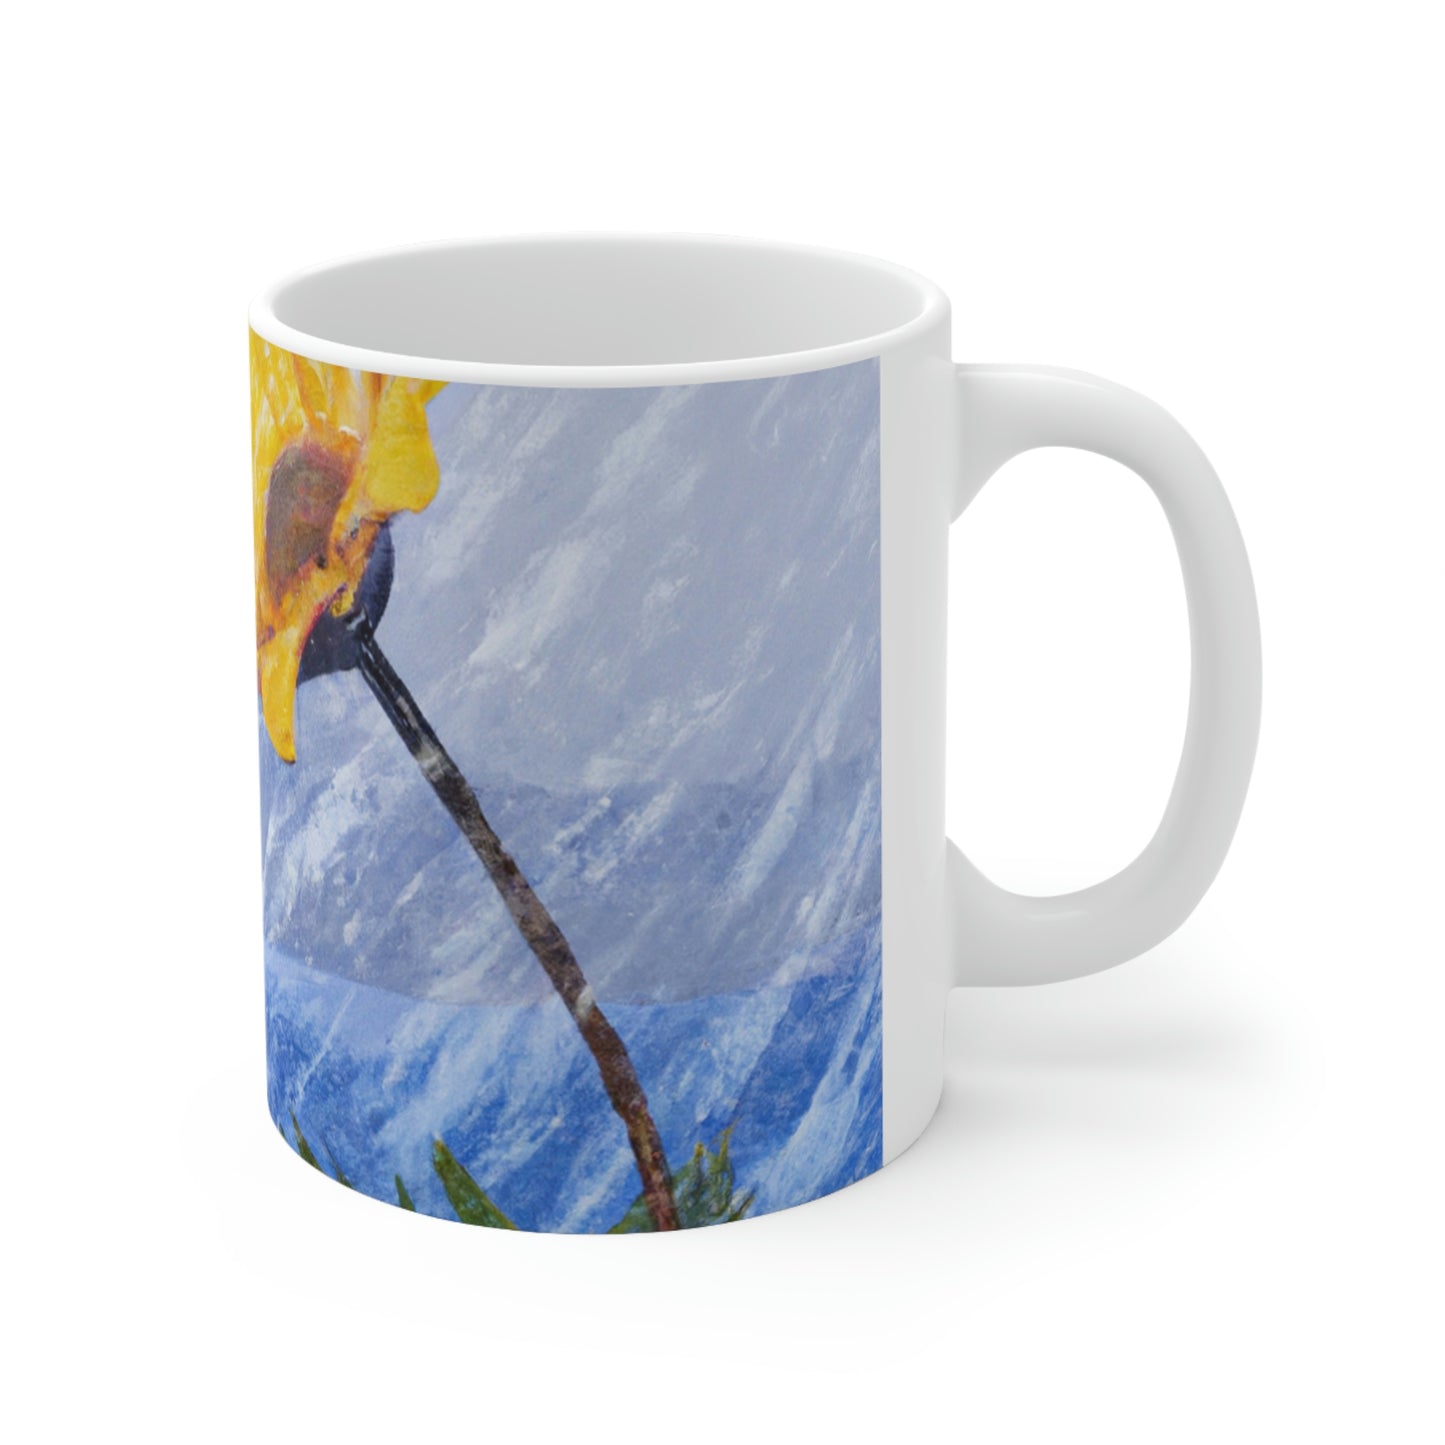 "A Burst of Color in the Glistening White: The Miracle of a Flower Blooms in a Snowstorm" - The Alien Ceramic Mug 11 oz